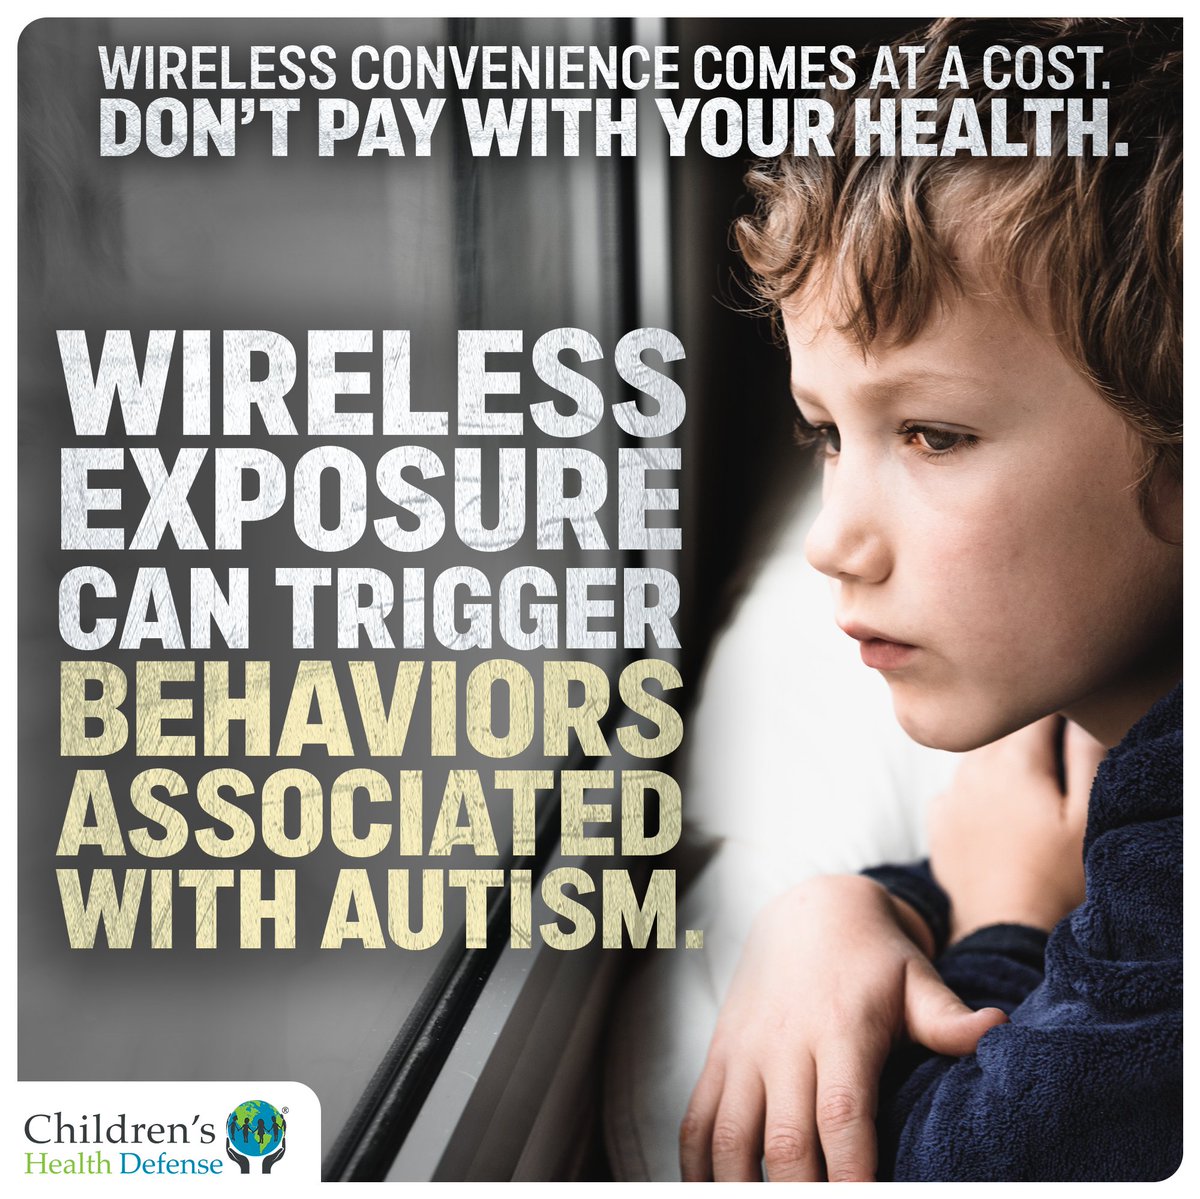 🚨 IMPORTANT PSA: Experts find “striking parallels” between the health impacts of wireless radiation exposure + autism, including sensory processing disorders, seizures + sleep disruption. #CHDEMR ⬇️ childrenshealthdefense.org/emr/emf-wirele…